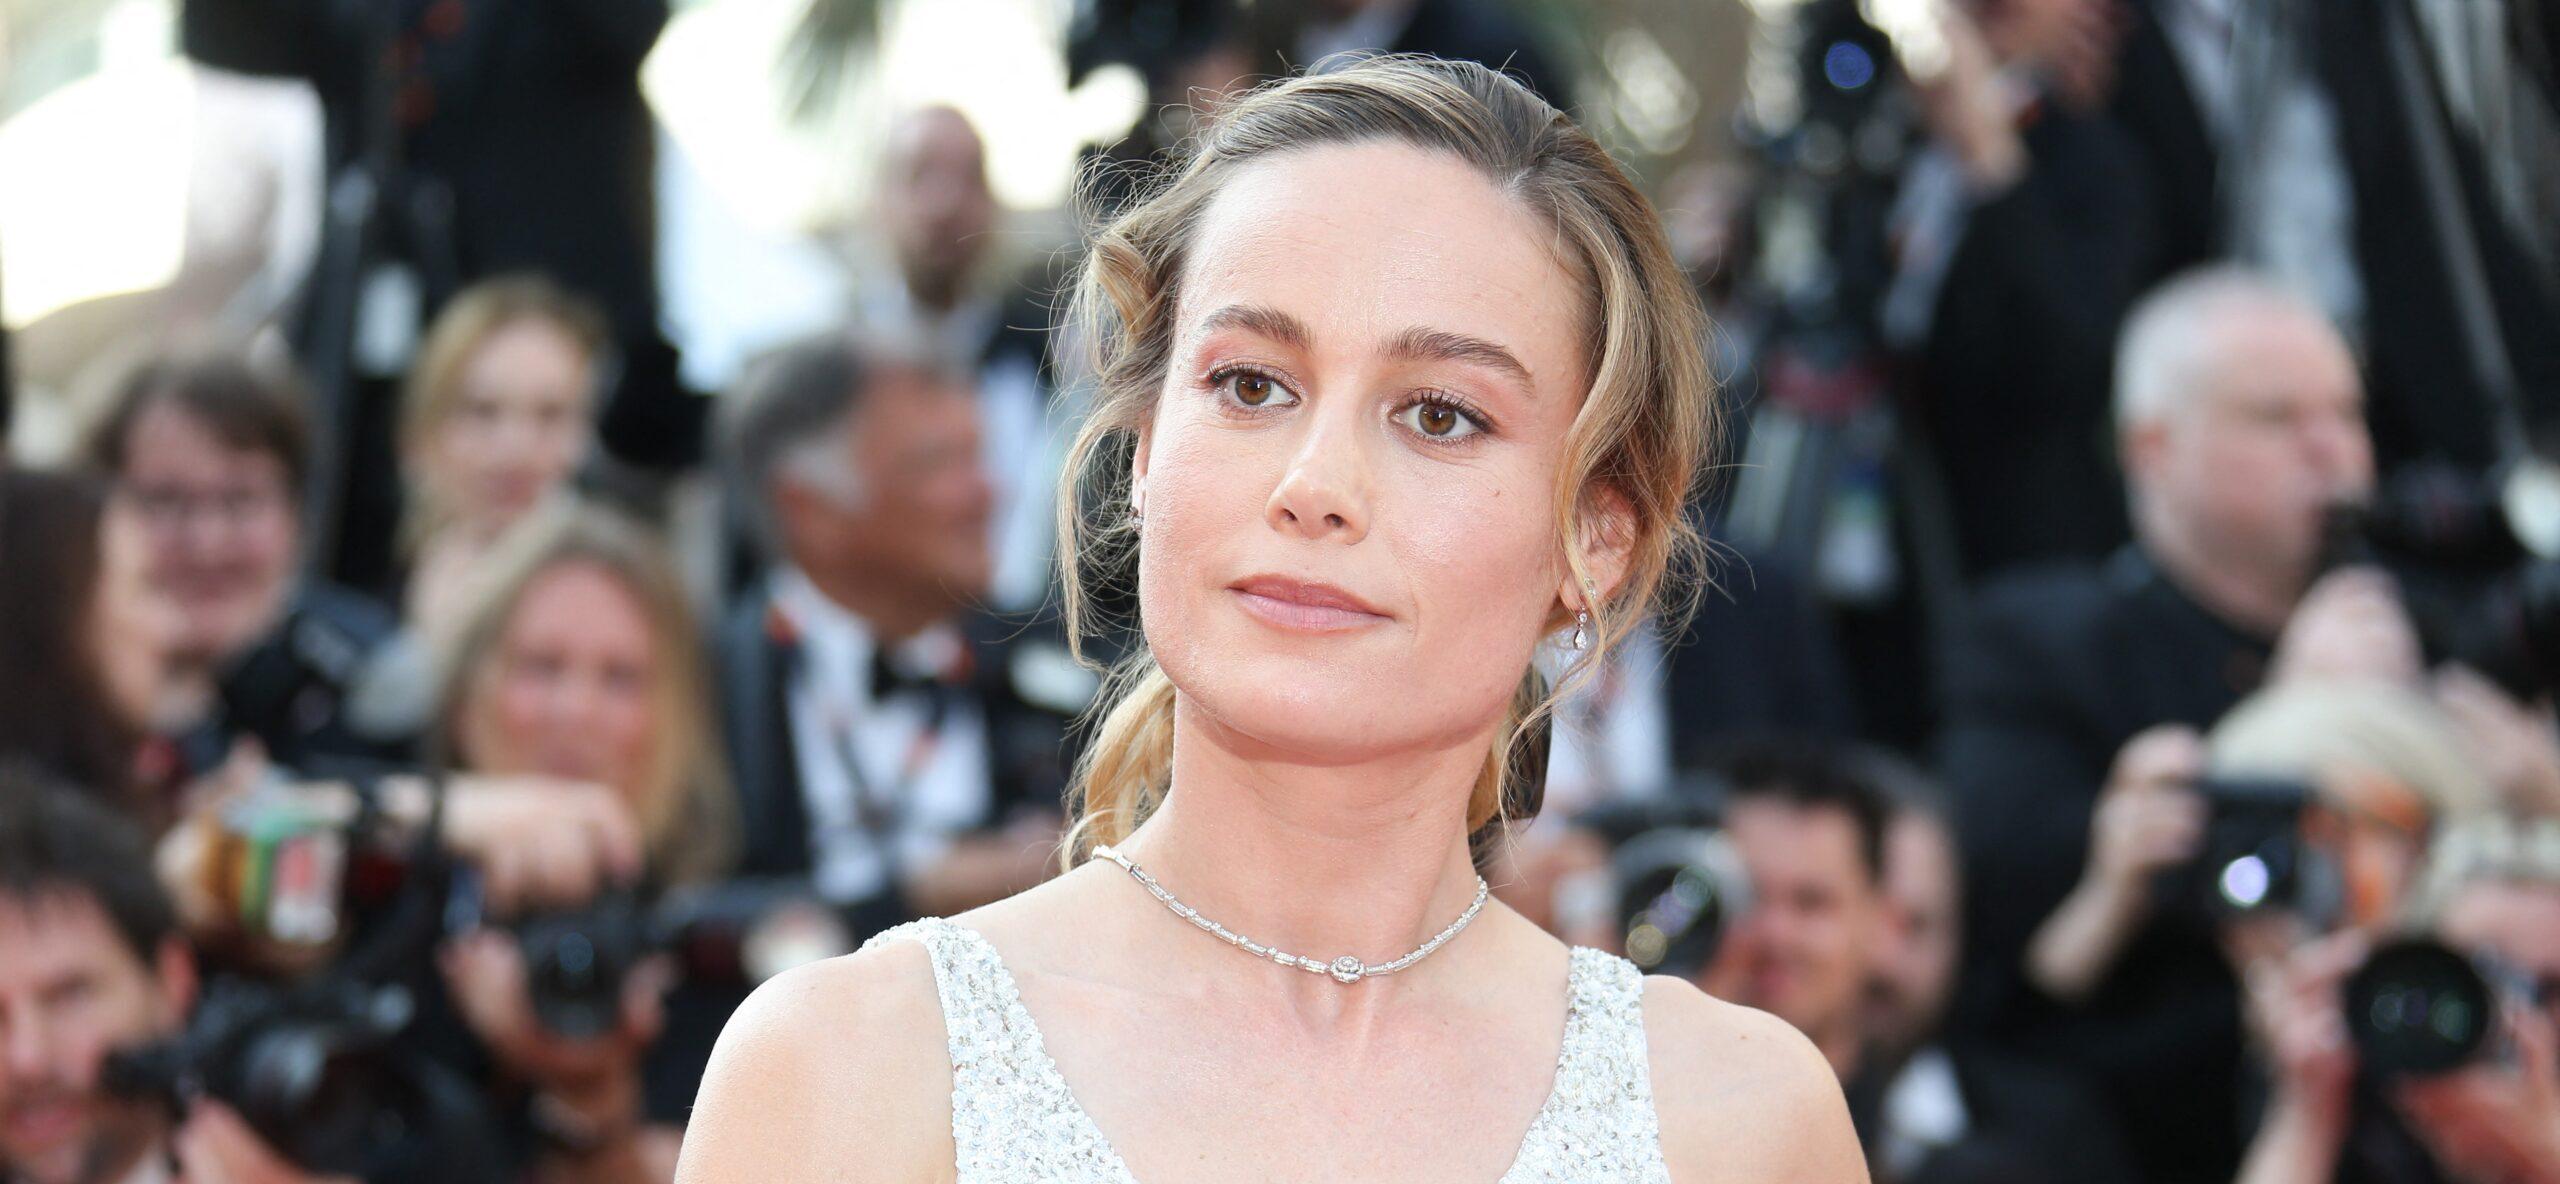 Brie Larson In Her Tight Two-Piece Workout Gear Takes On Cryotherapy